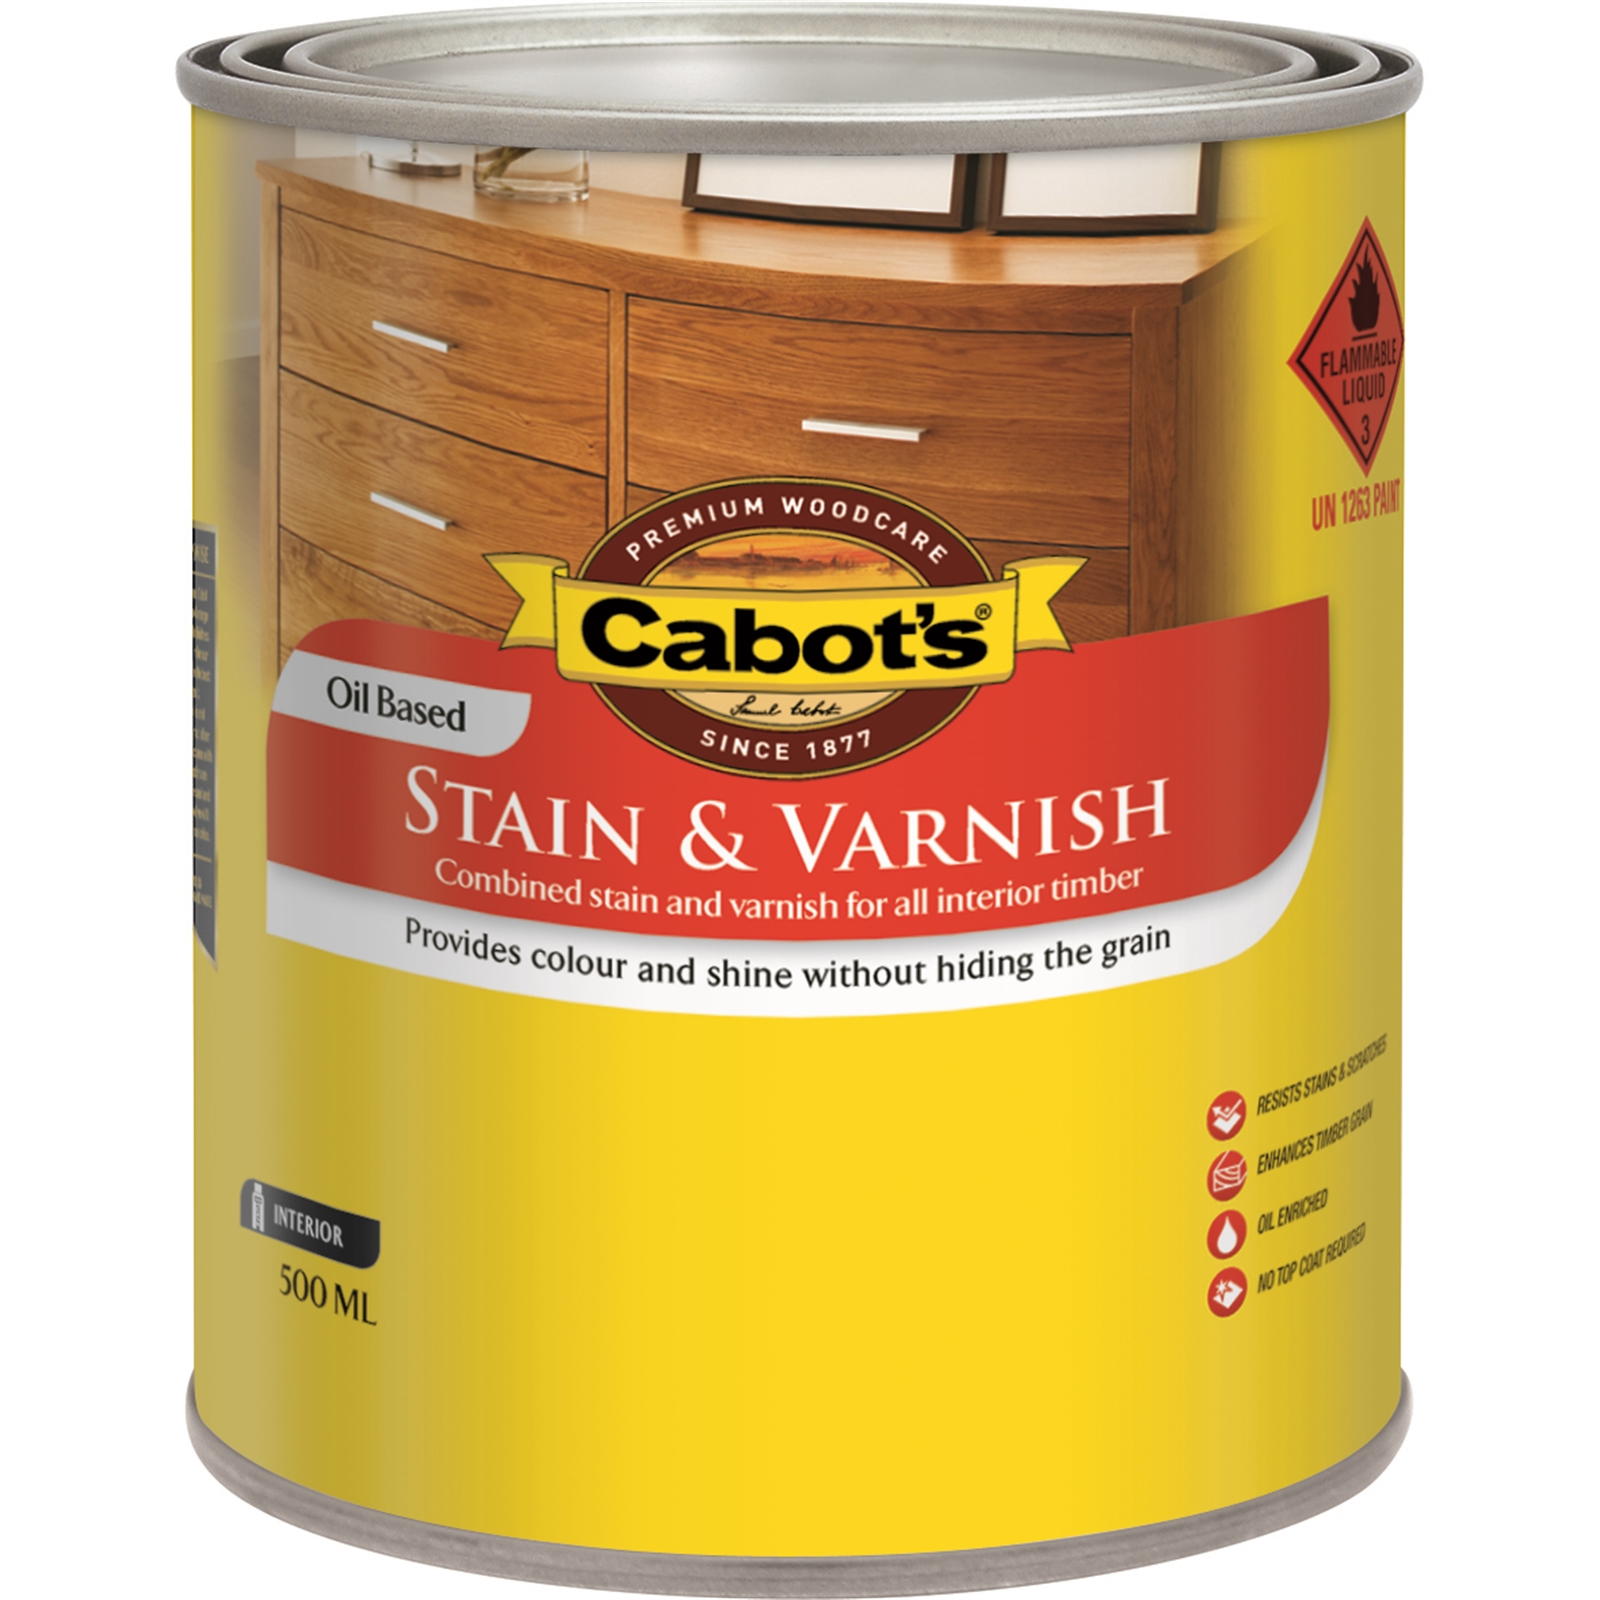 Cabot's 500ml Gloss Oil Based Jarrah Stain and Varnish